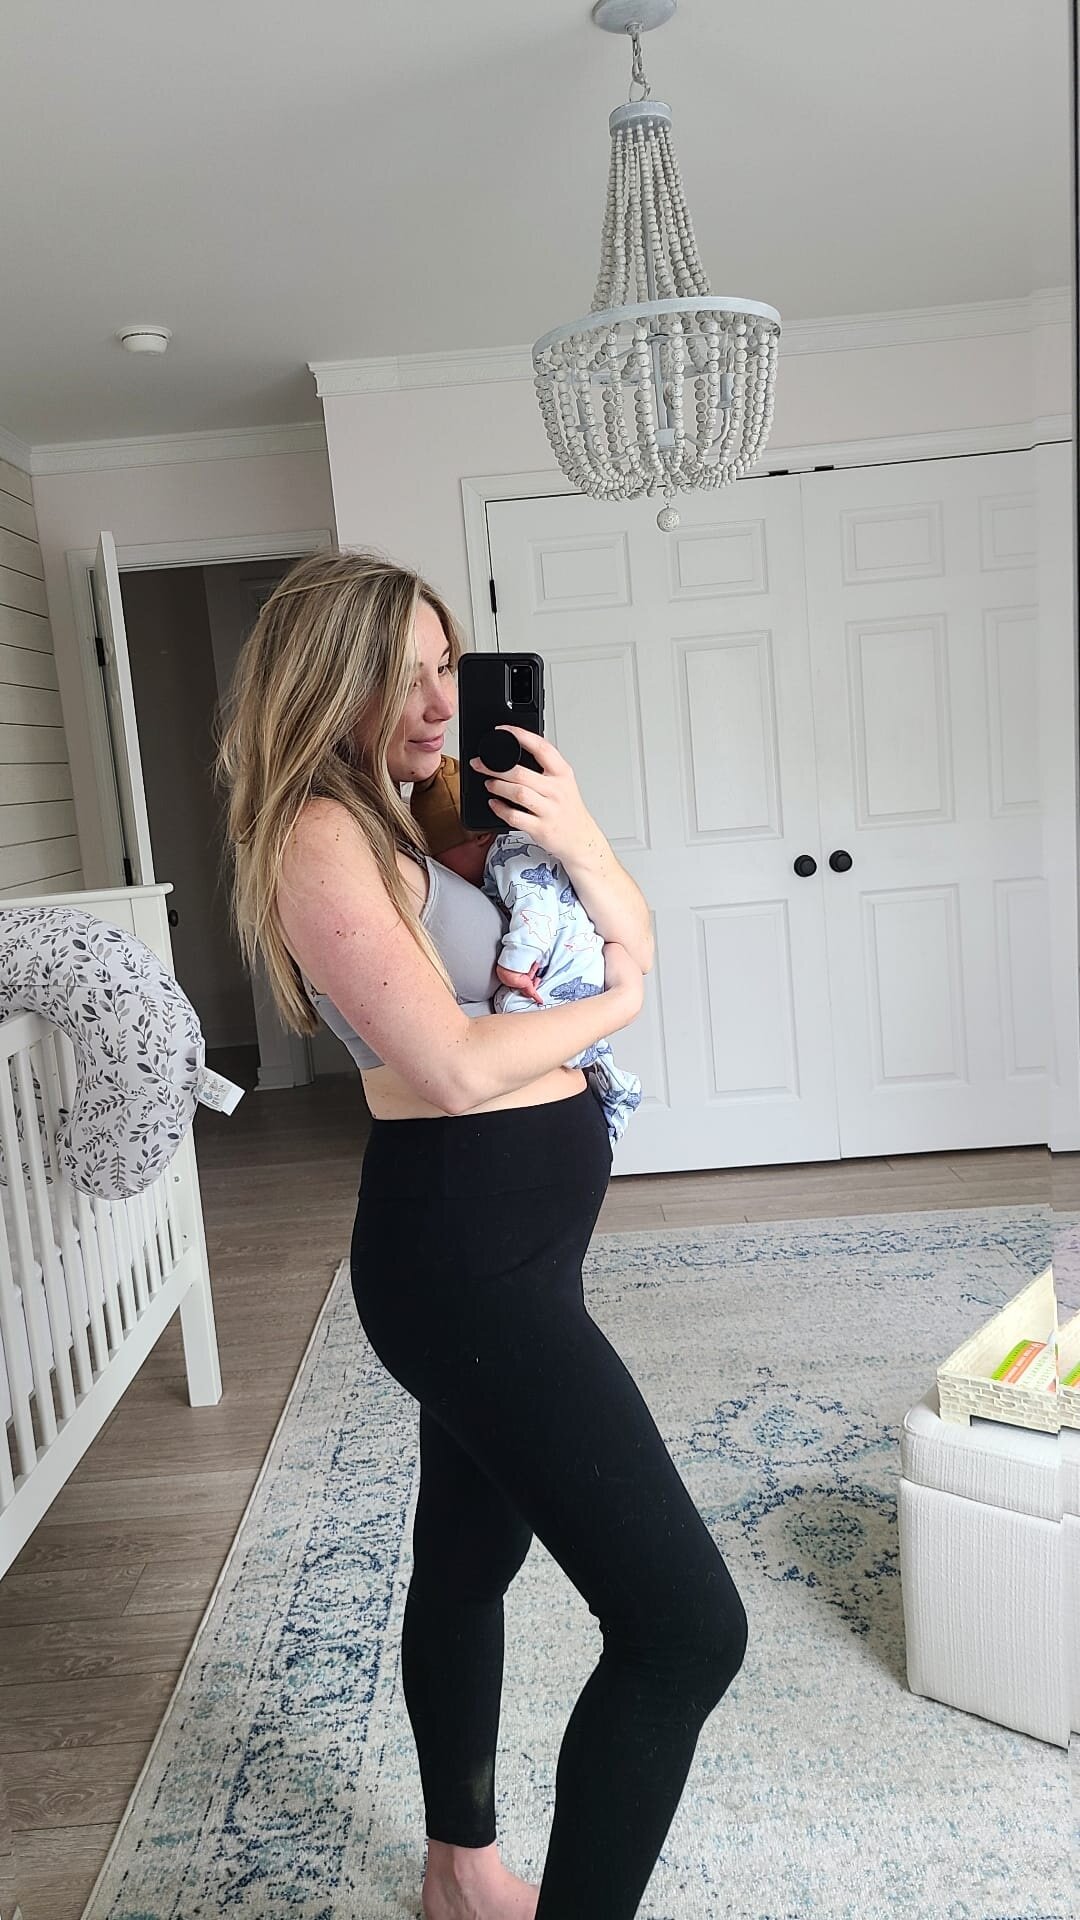 I Gained Over 40lbs While Pregnant - Here's How I Lost the Weight ...